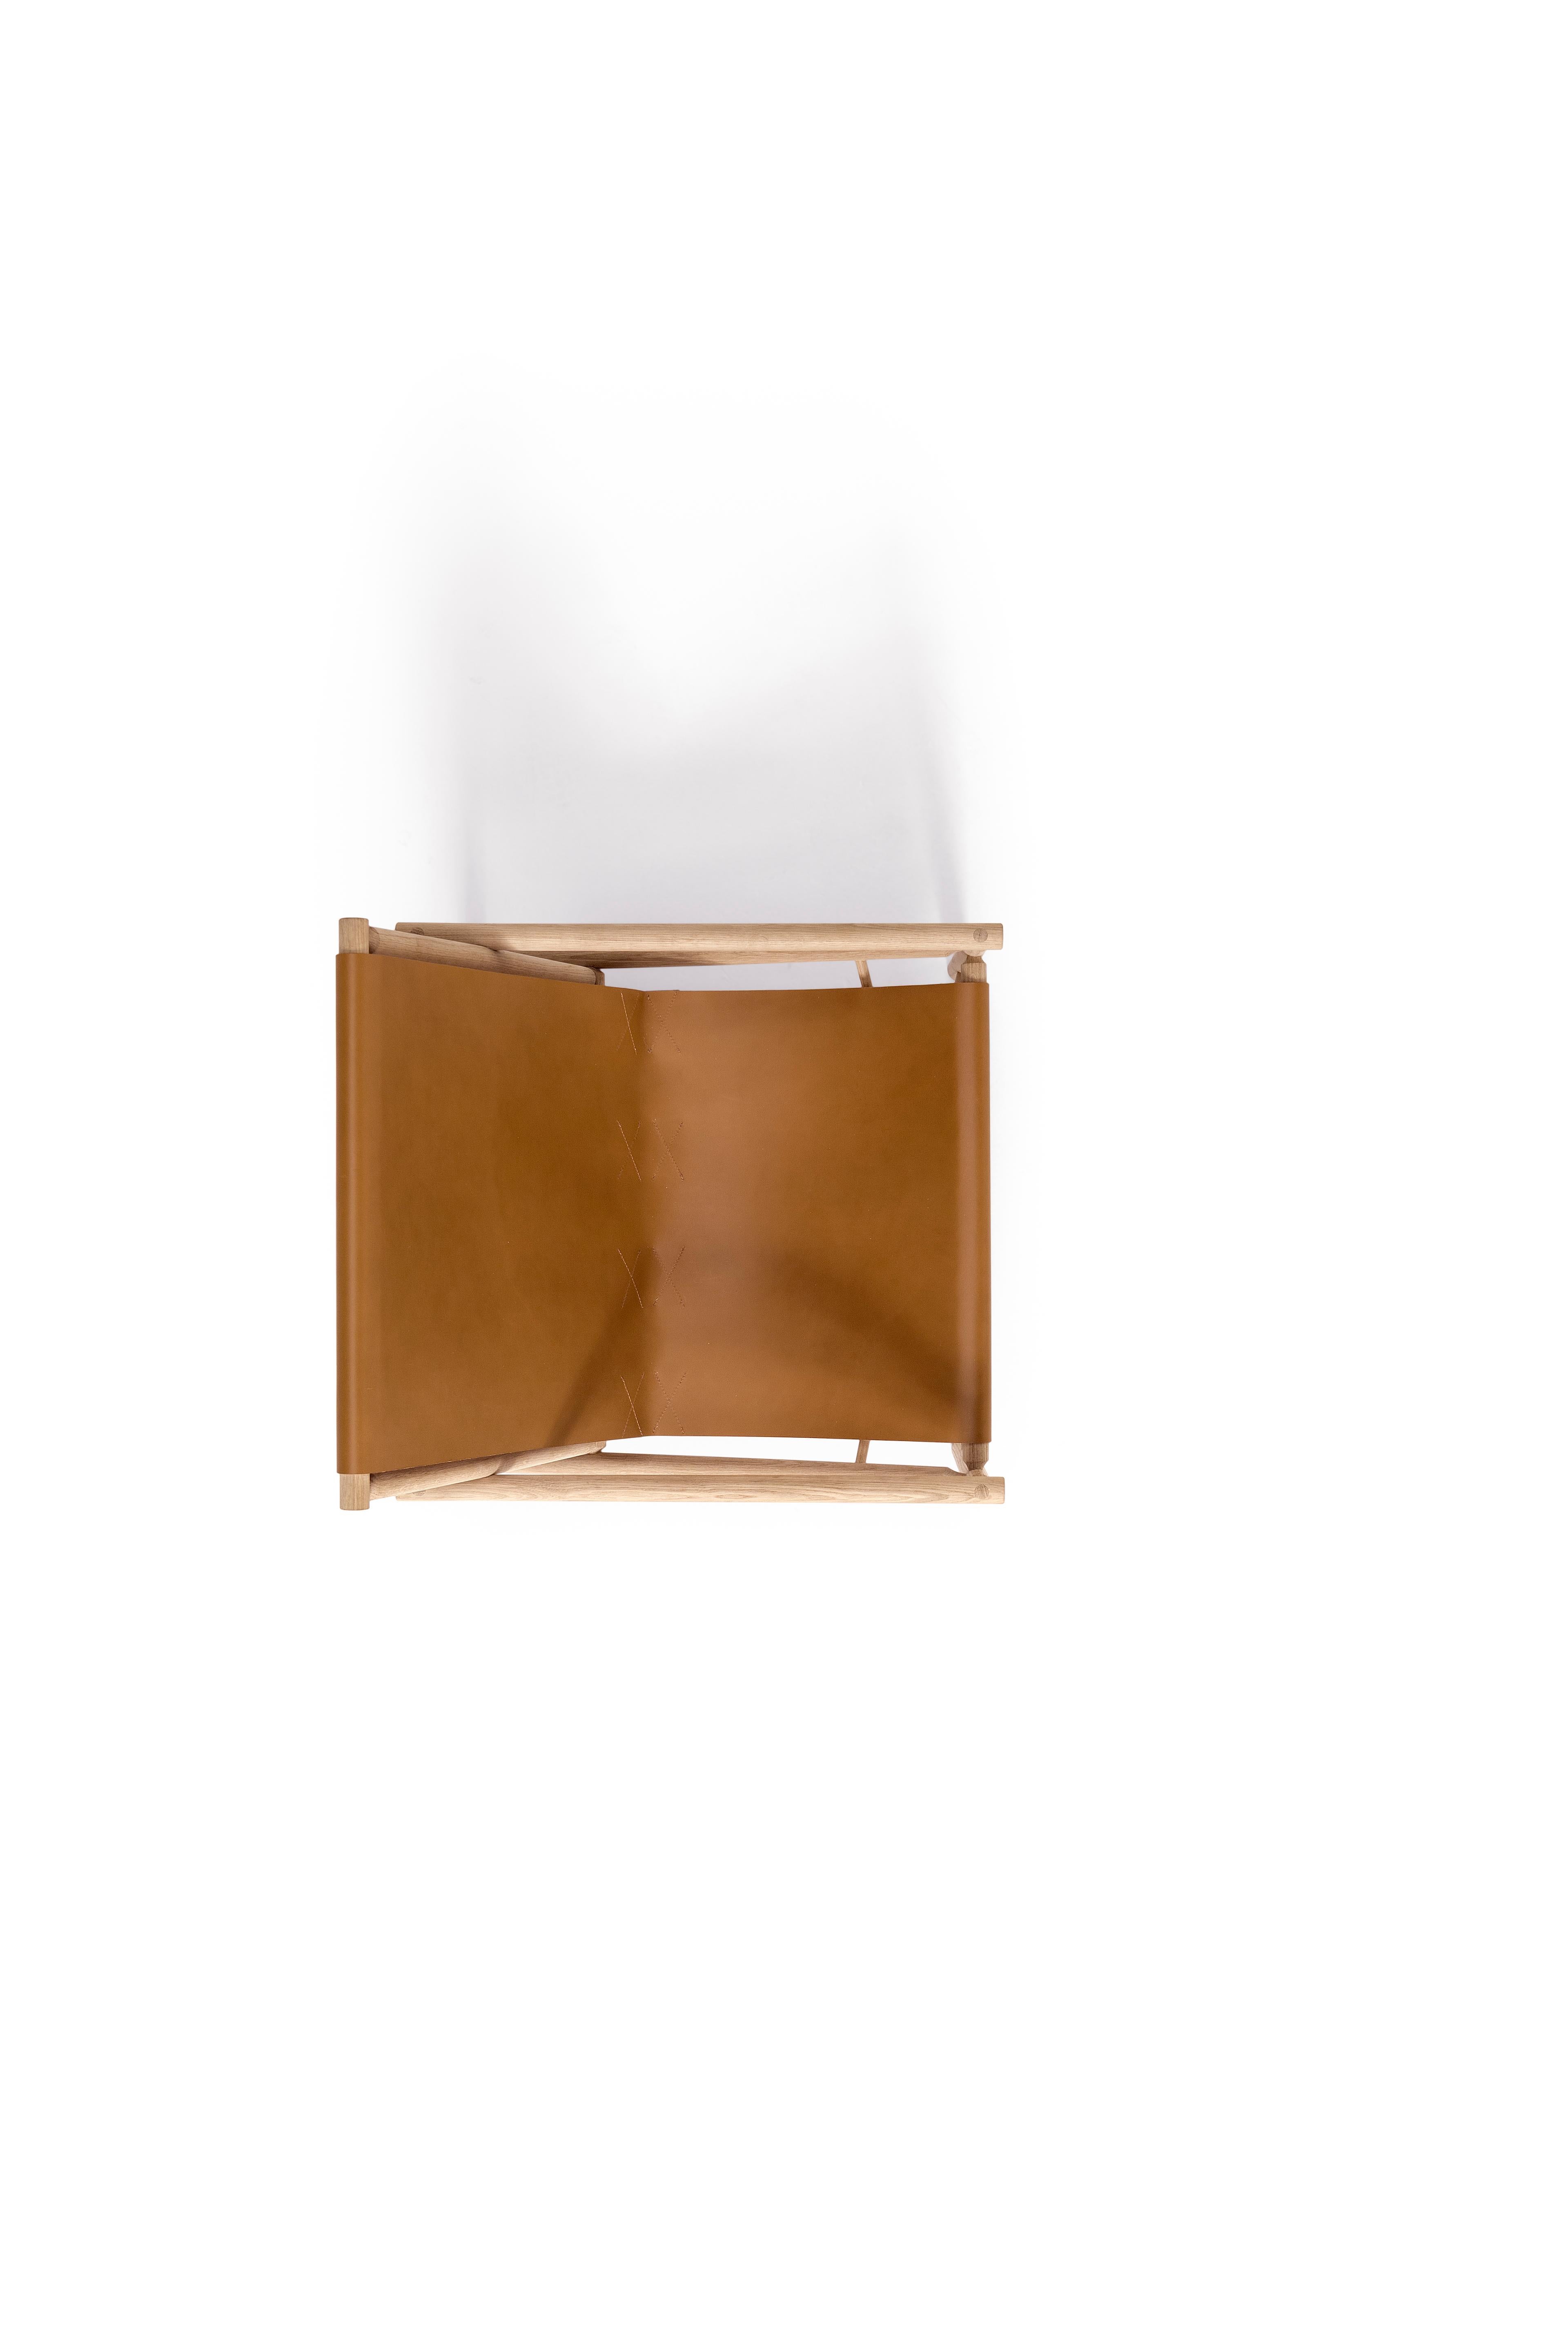 Modern Amura 'Ease' Chair in Light Brown Leather by Gareth Neal For Sale